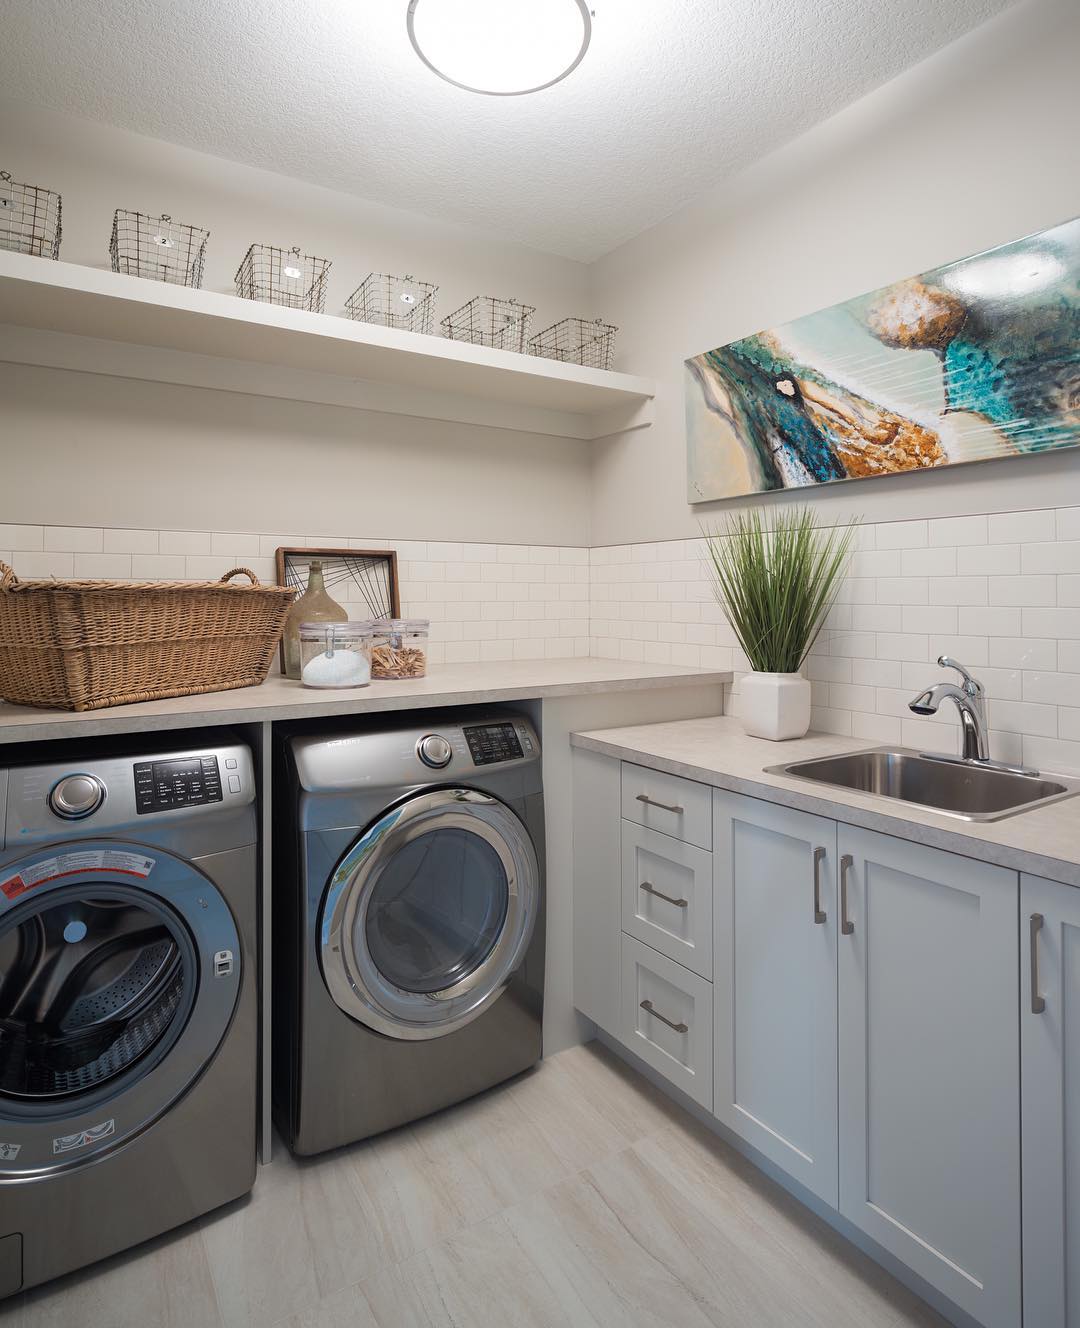 Who says a laundry room can't be stylish